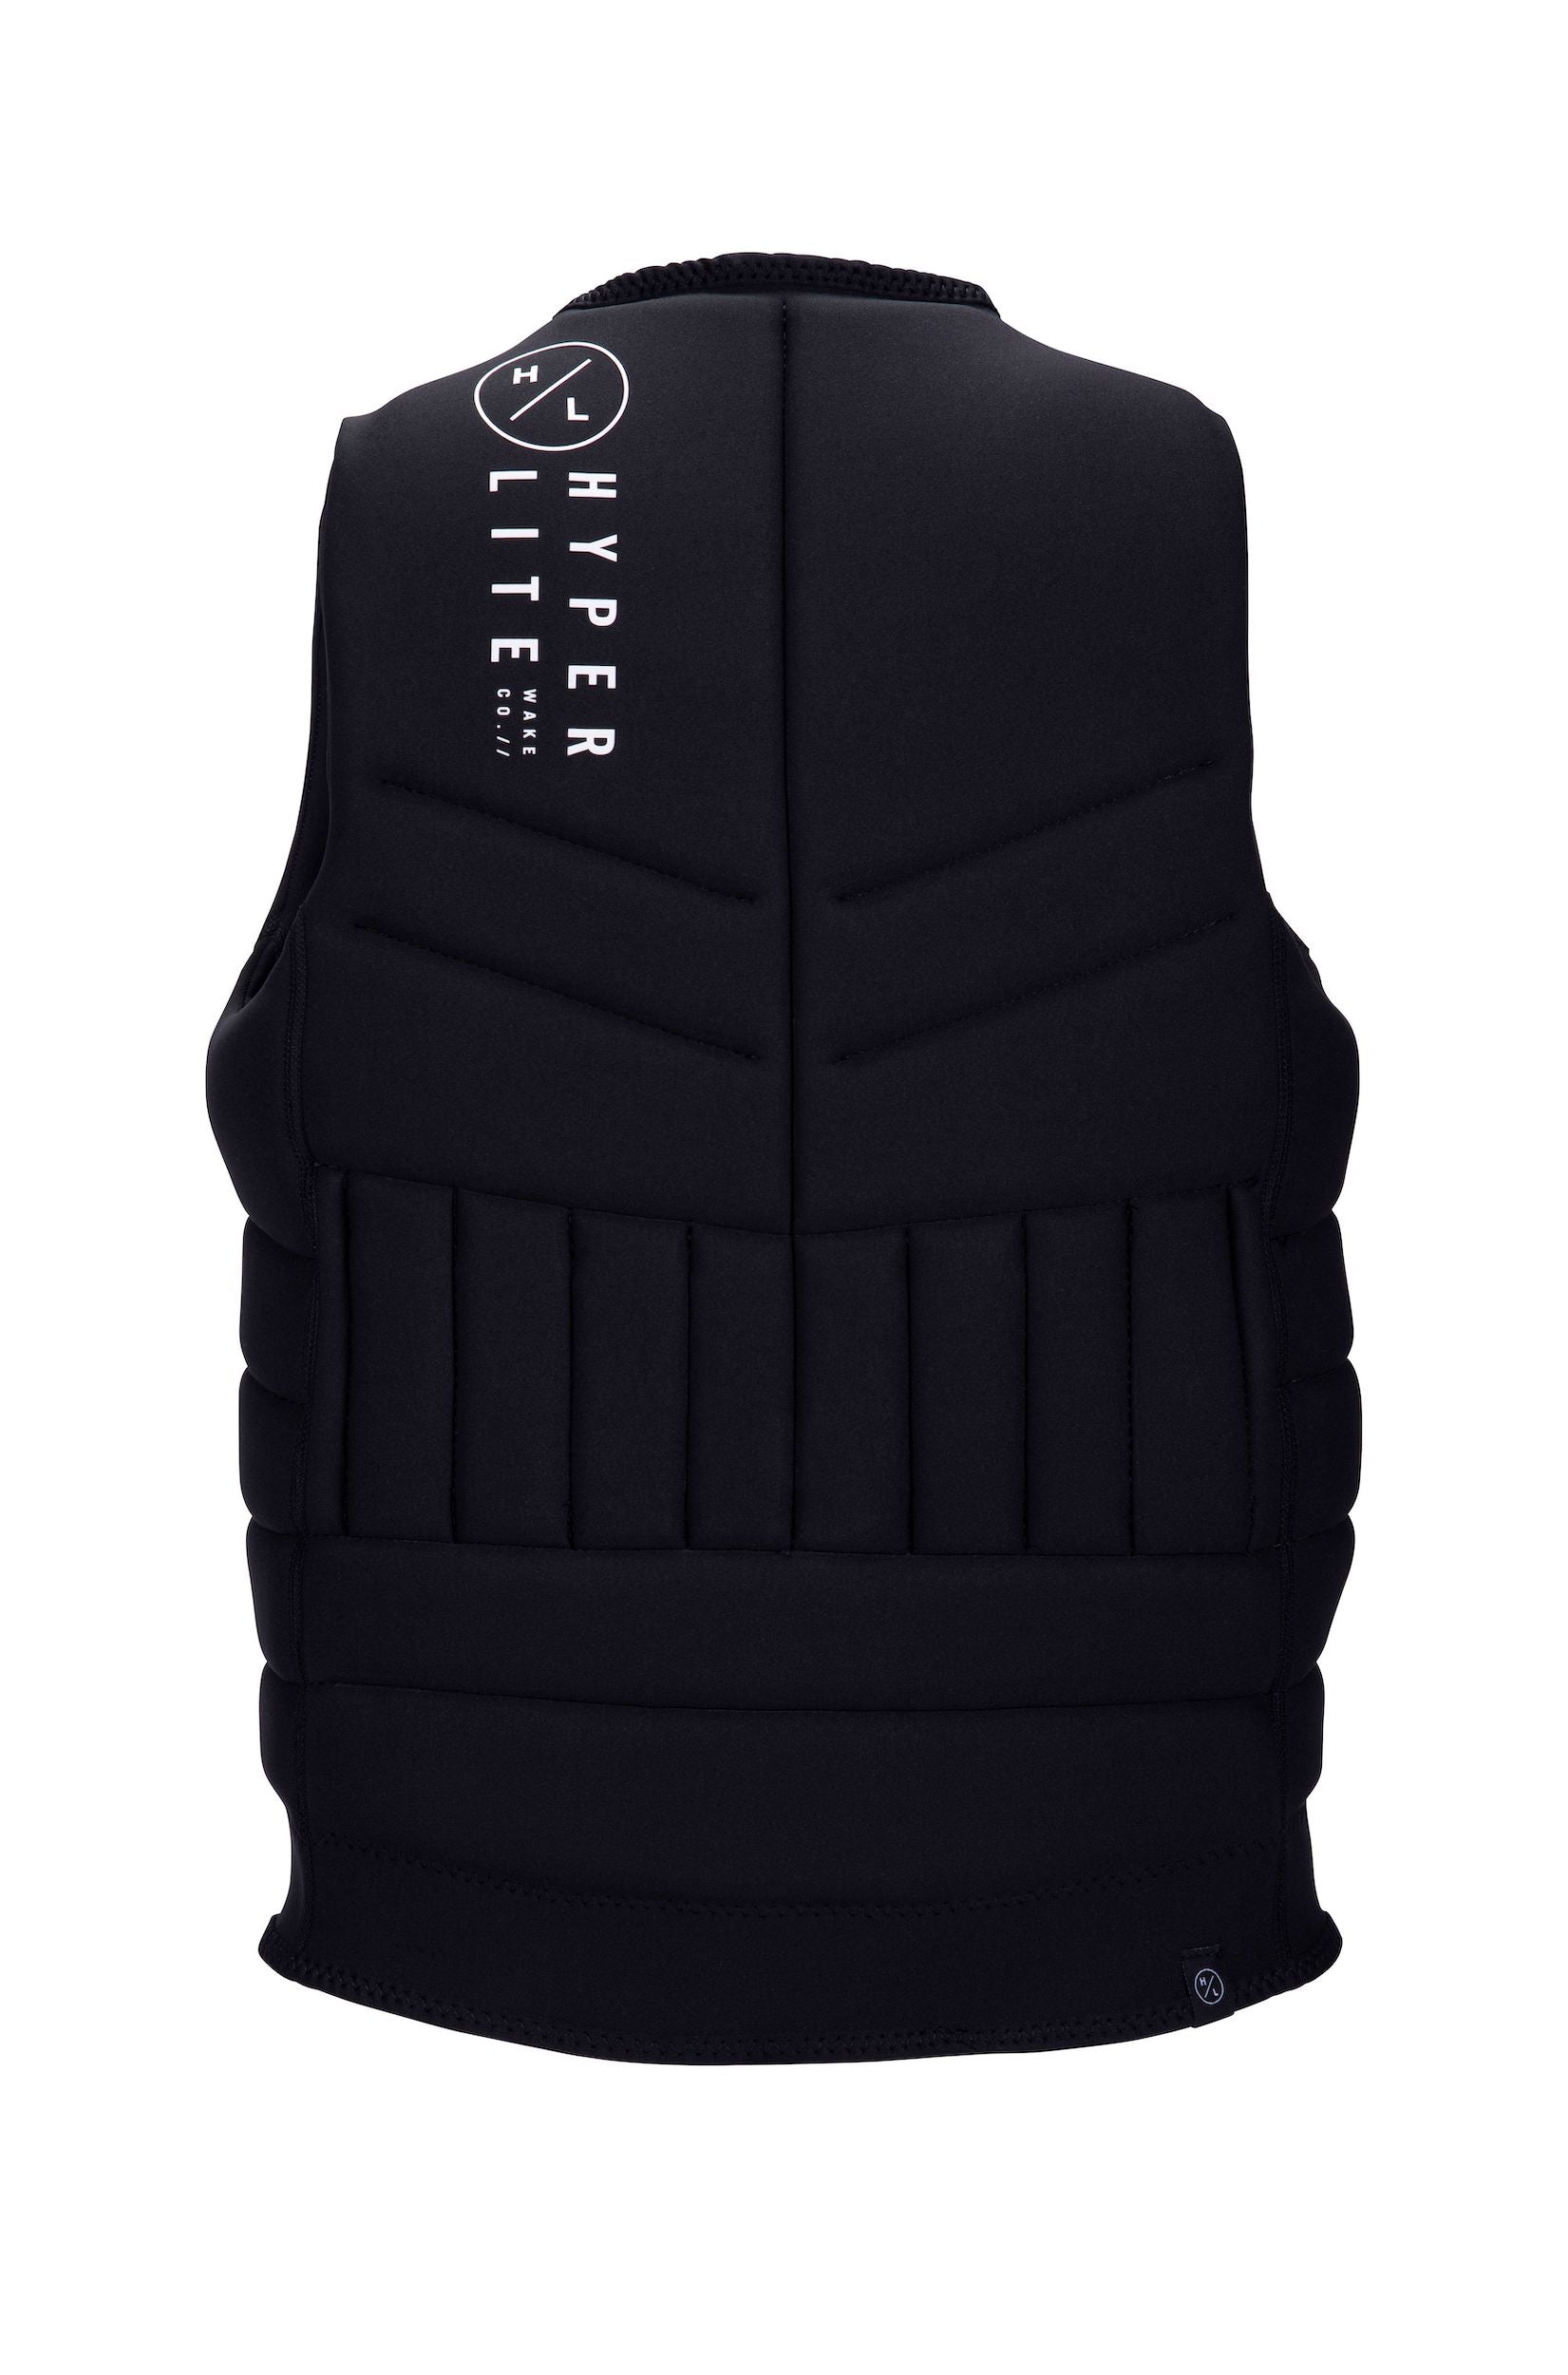 A Hyperlite 2024 NCGA Blueprint Vest with a white logo on it, also known as the Impact Jacket.